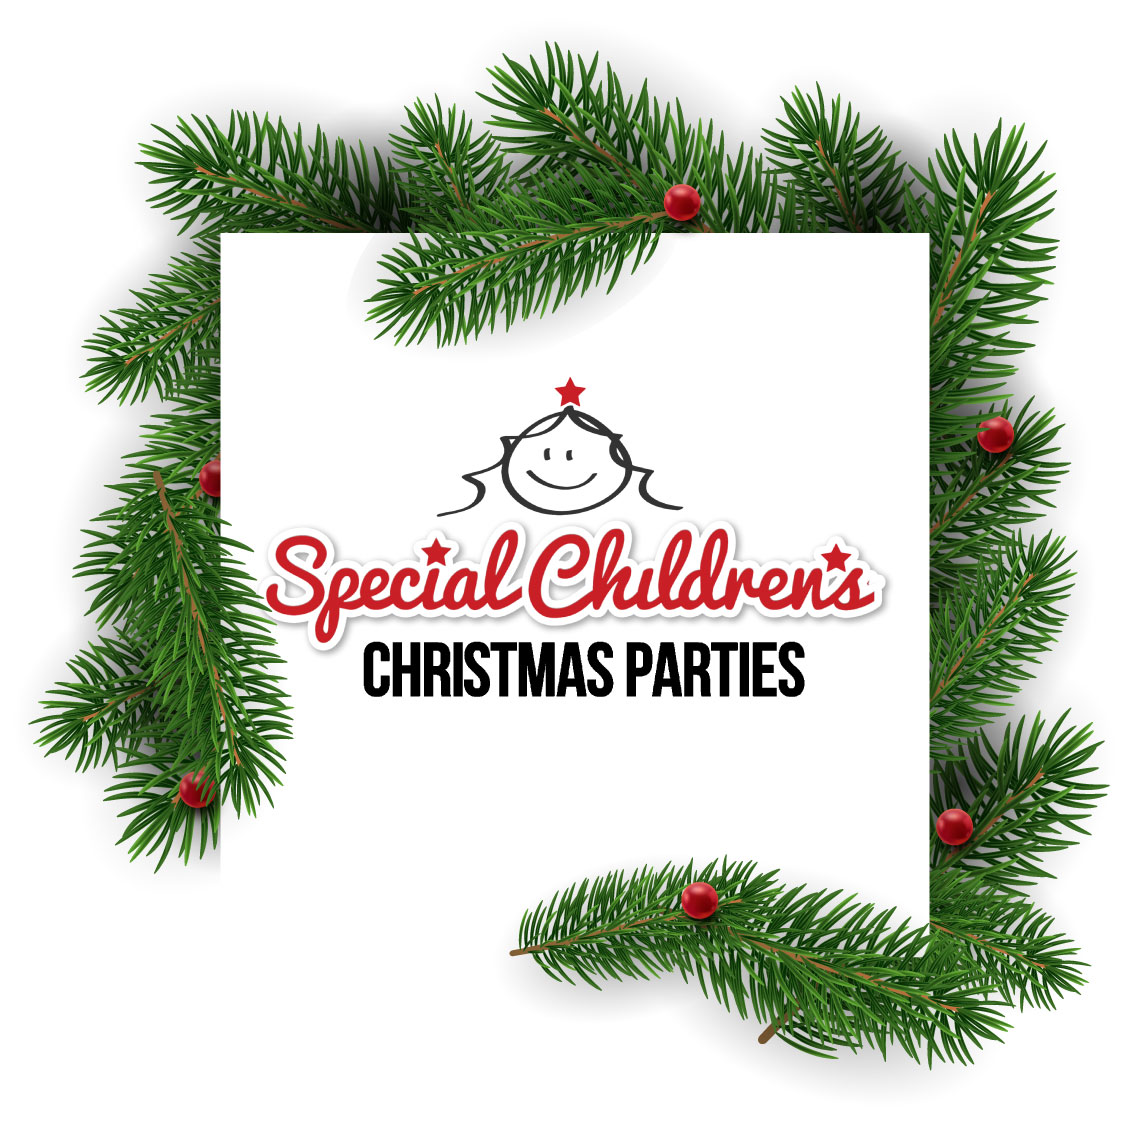 special-childrens-christmas-parties-support-aqualinc